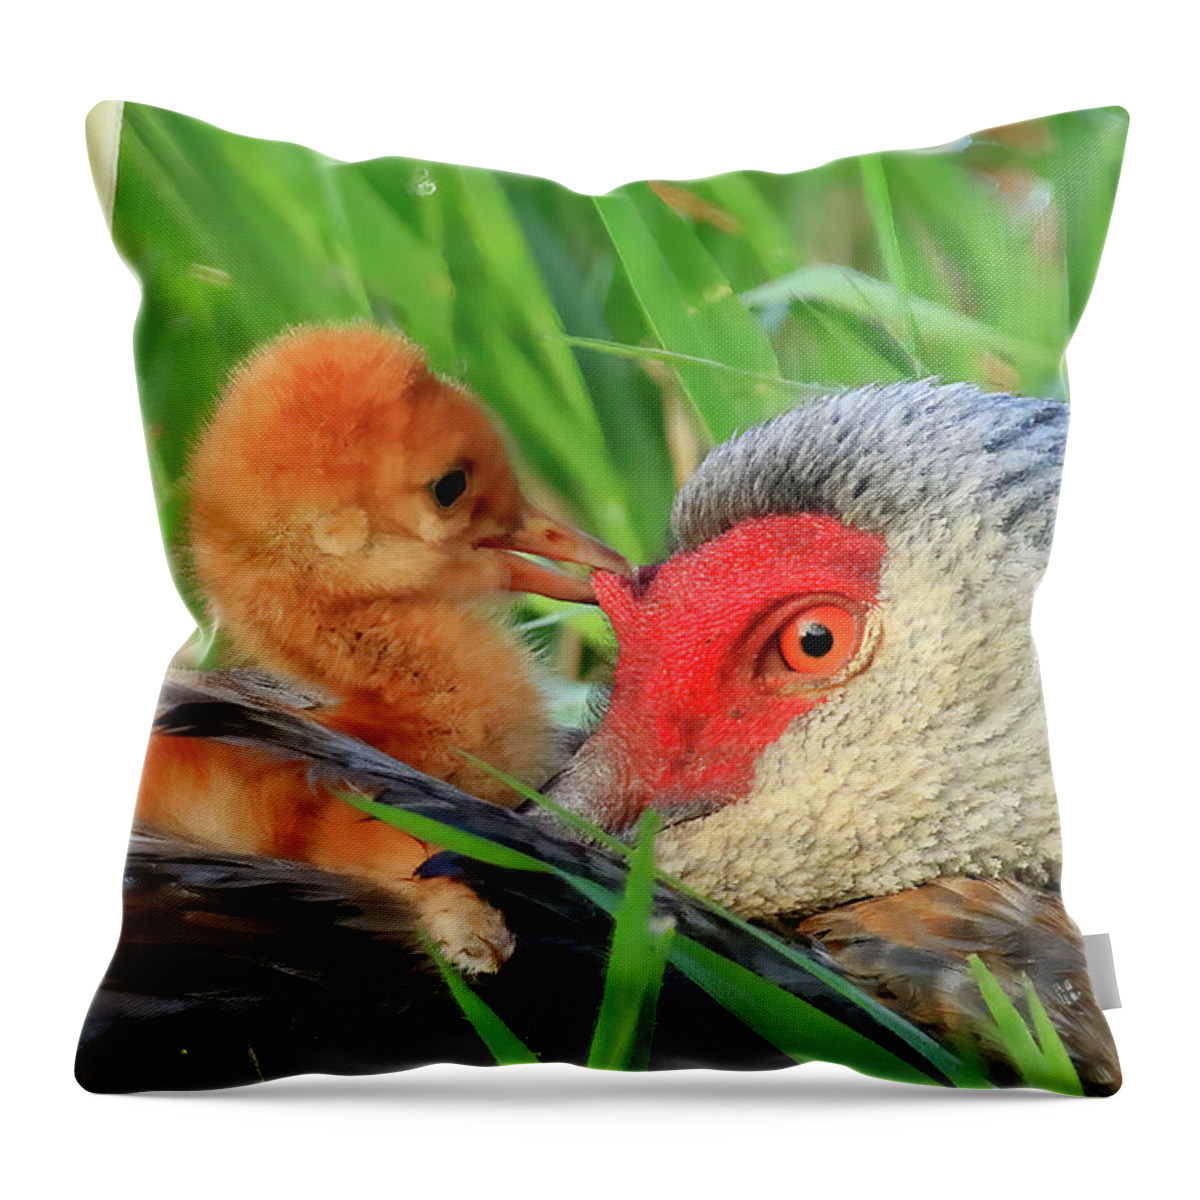 Sandhill Cranes Throw Pillow featuring the photograph Sandhill Crane Colt Playing with the Red Skin on Mom's Head by Shixing Wen